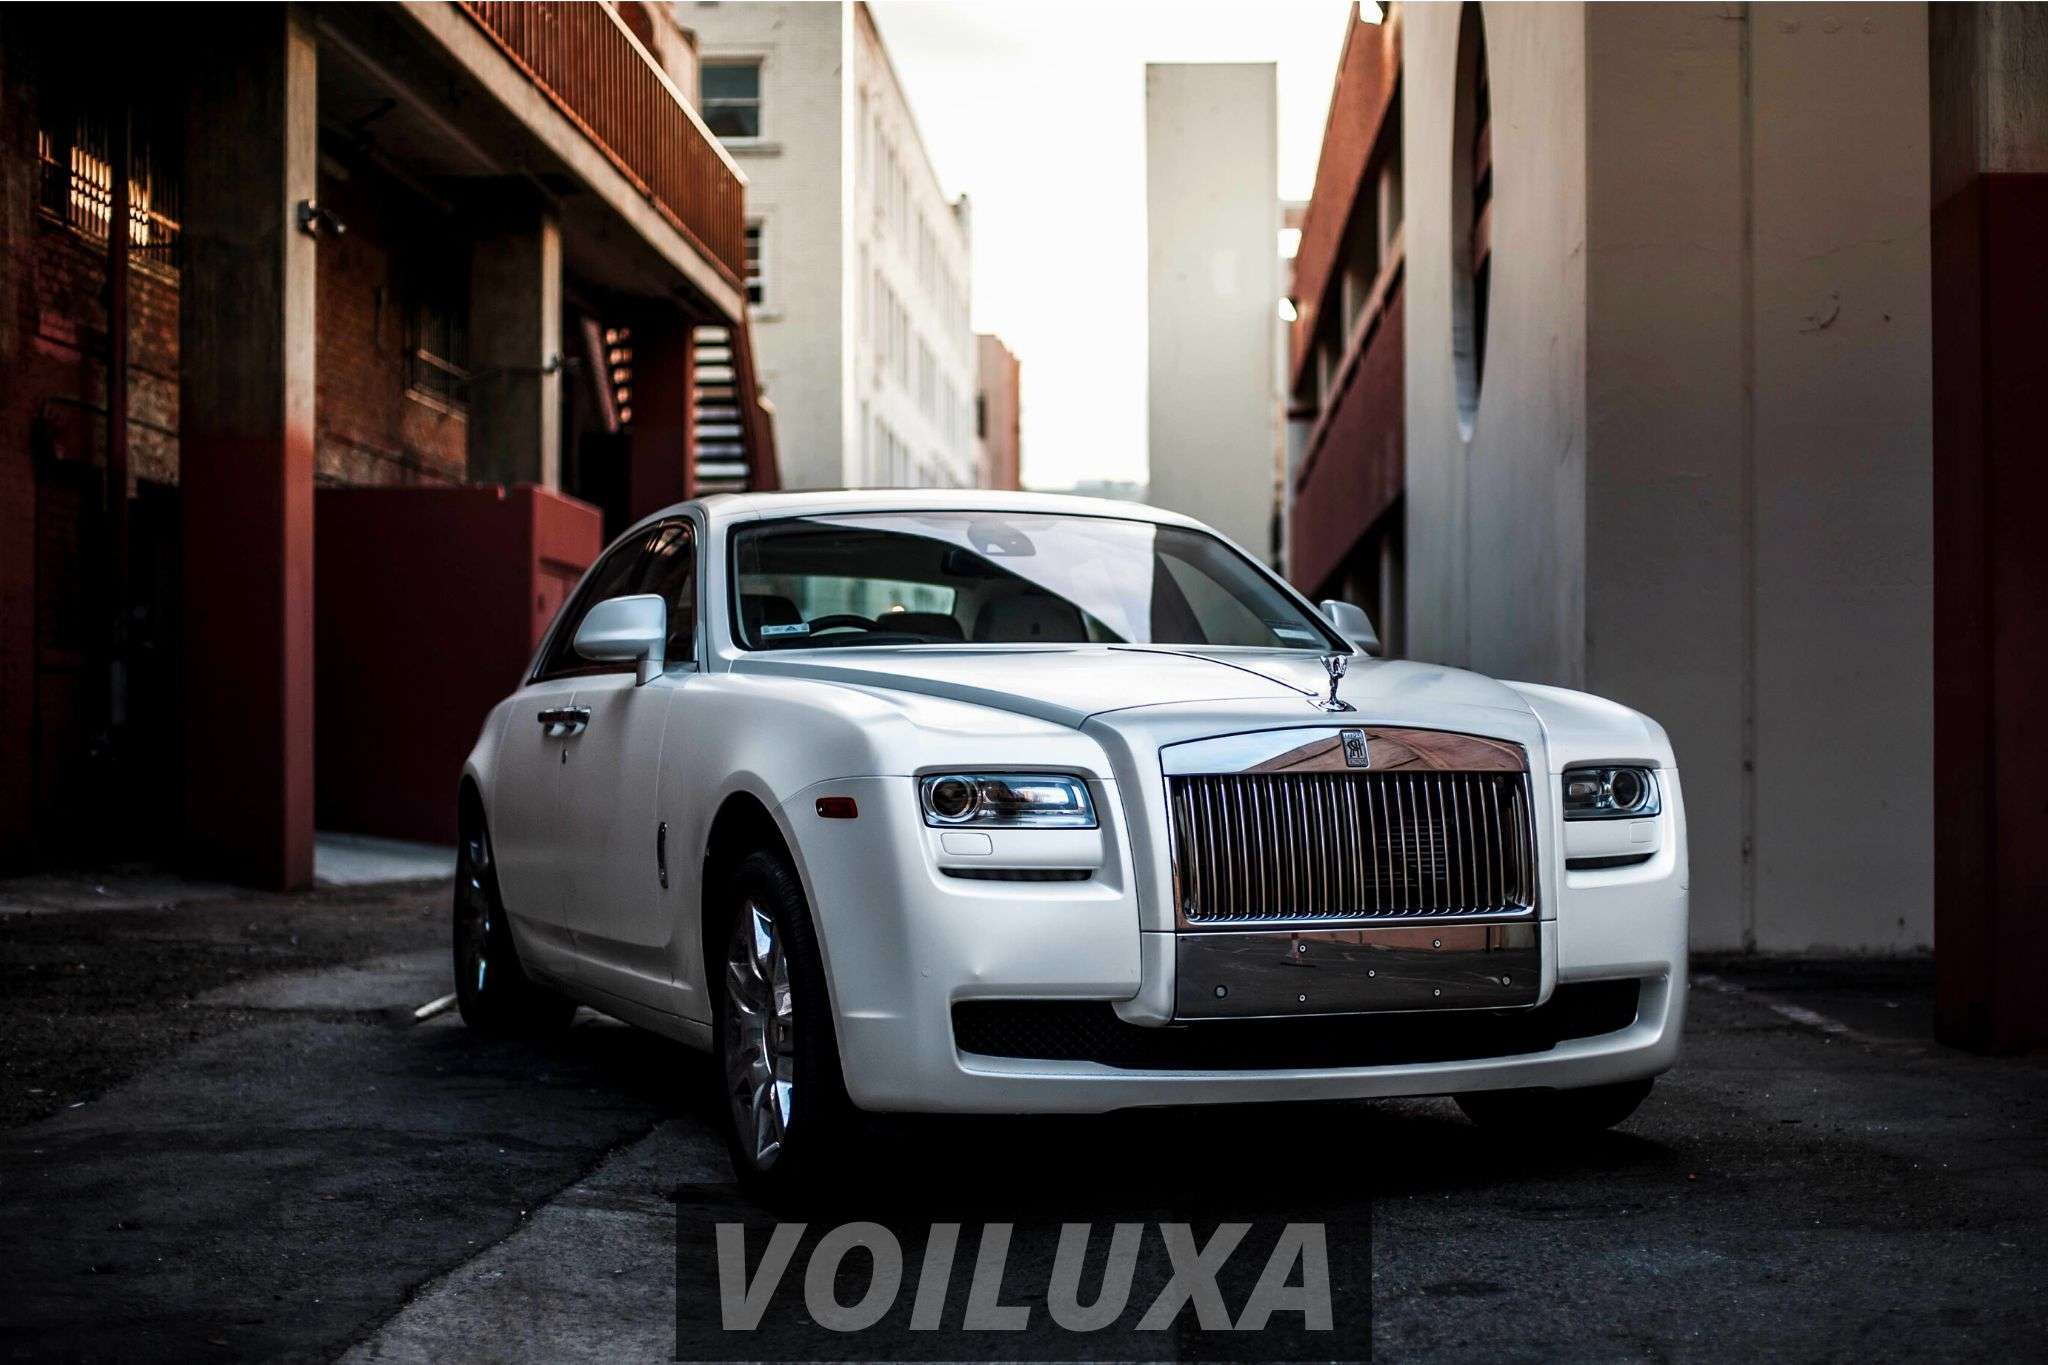 Why Is Rolls Royce Stock So Cheap?